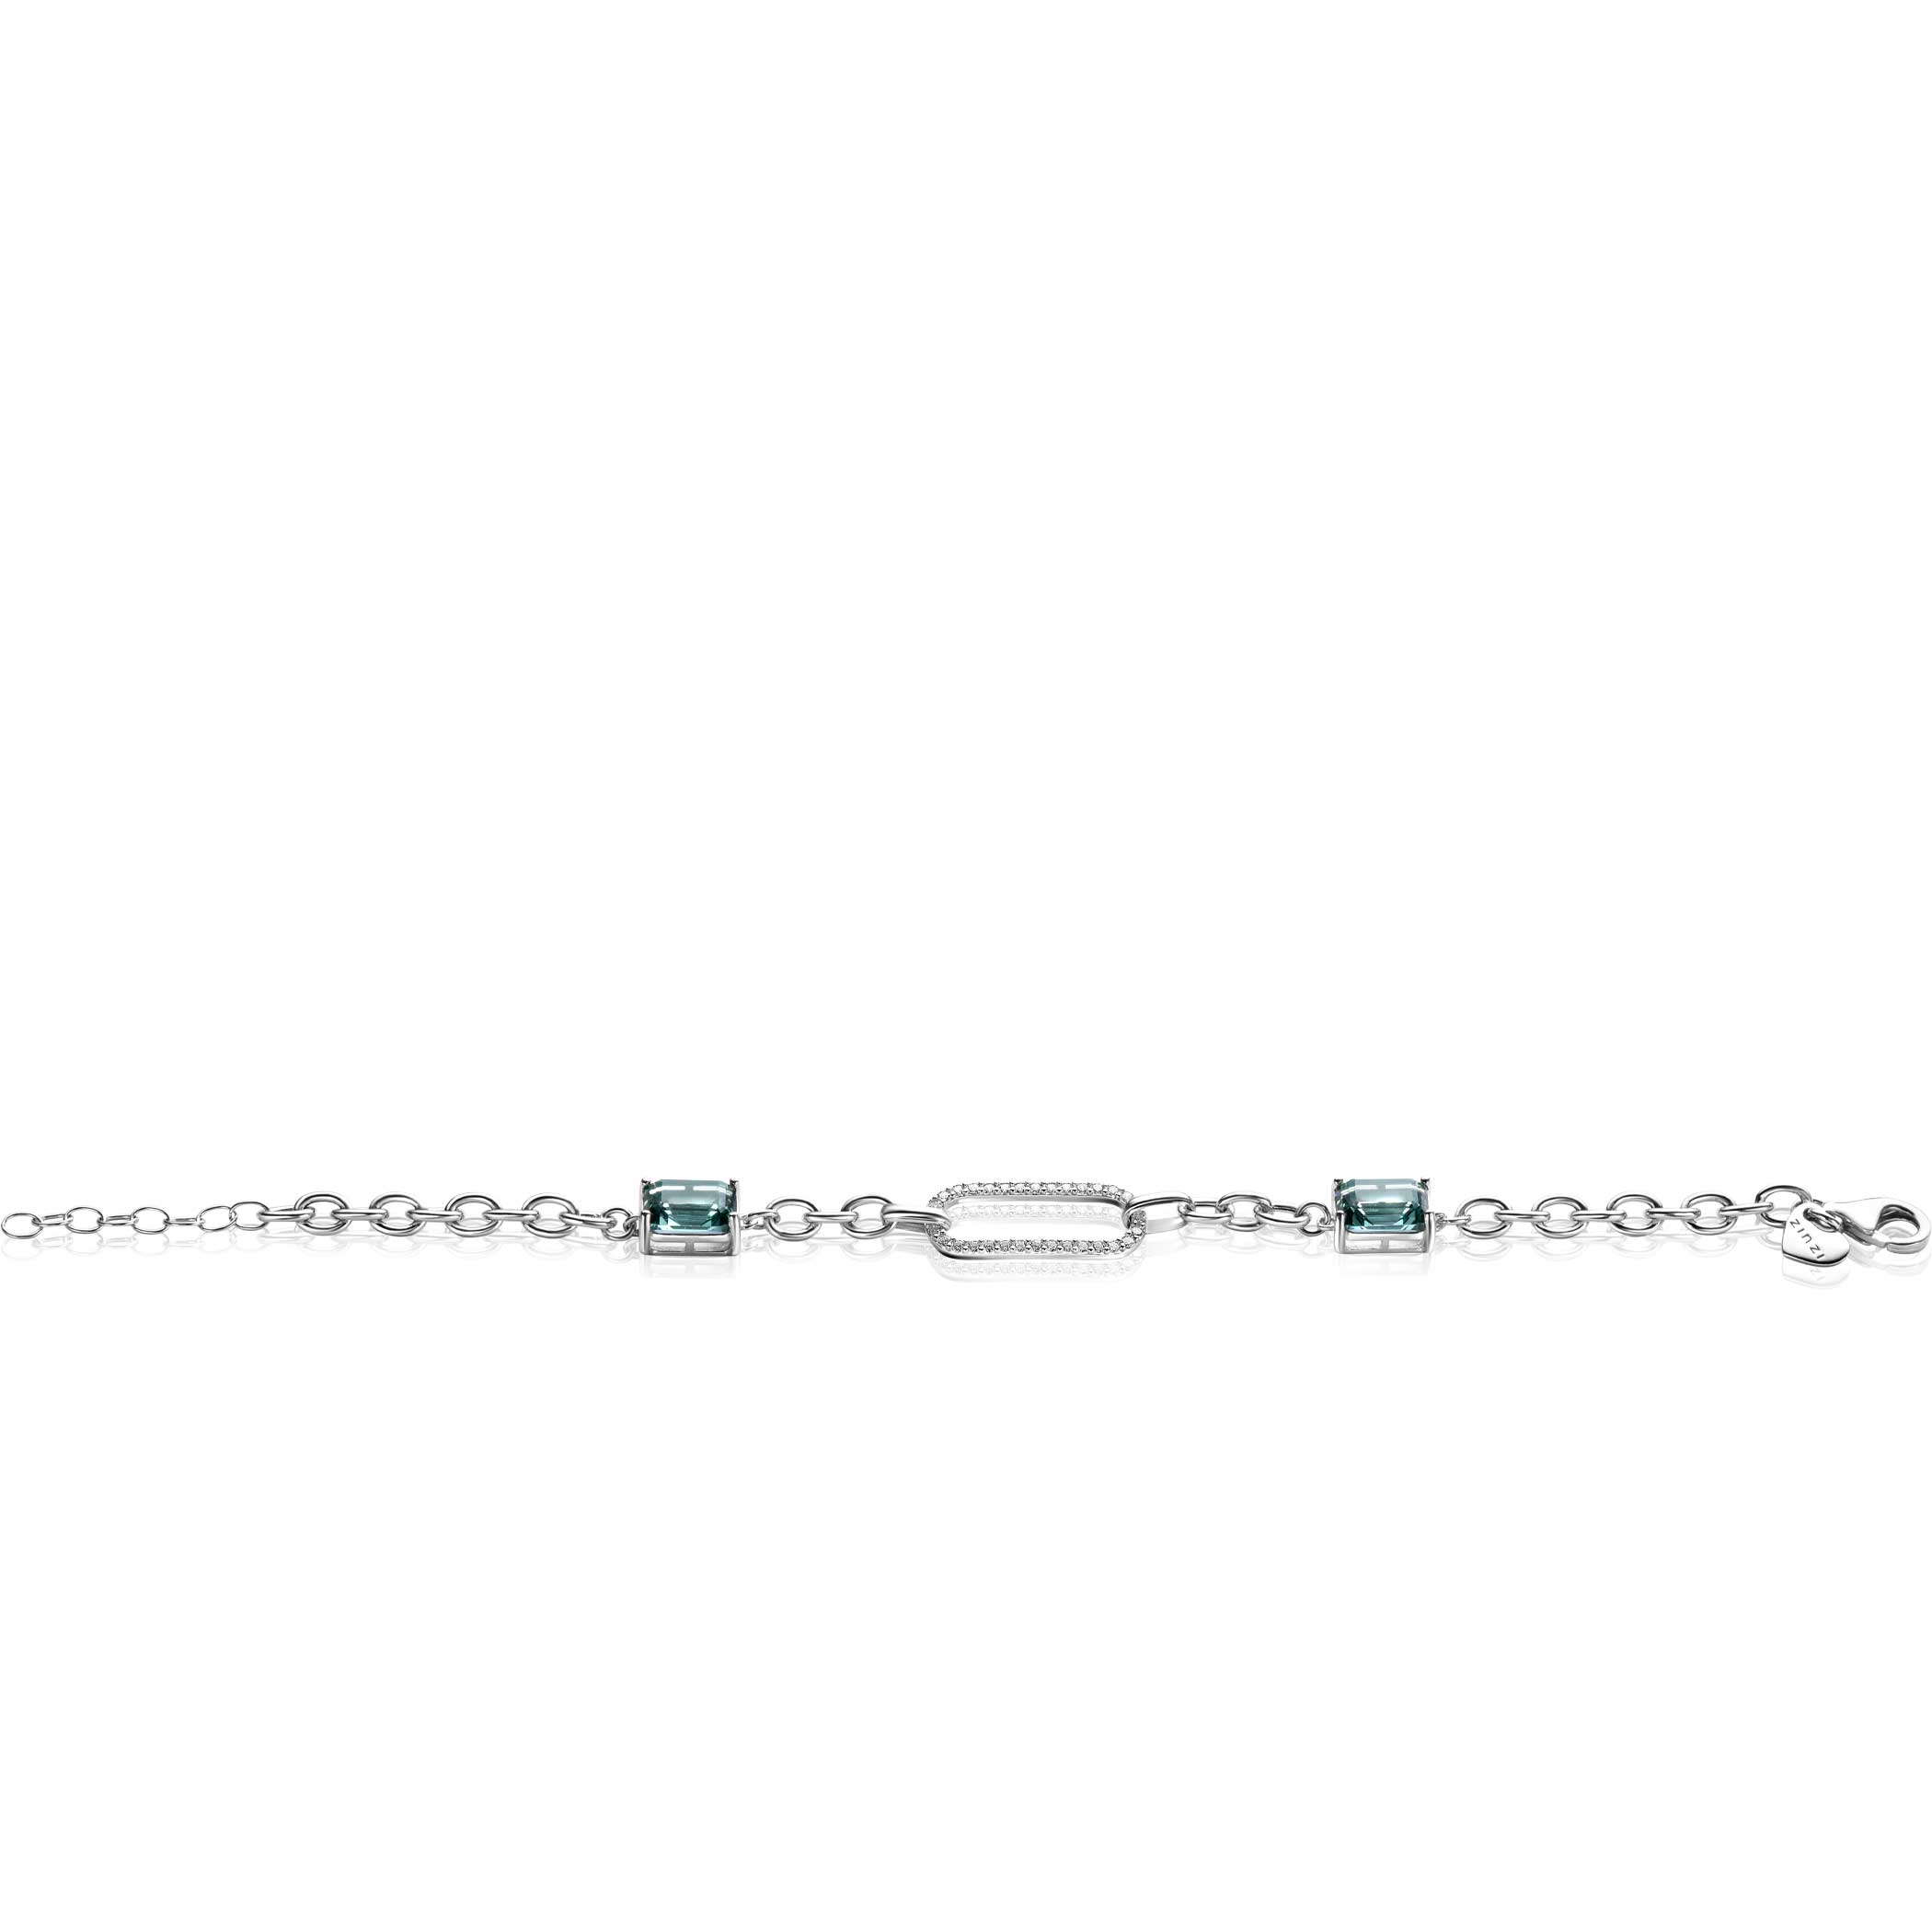 ZINZI Sterling Silver Fantasy Chain Bracelet with a Single Oval Chain Set with White Zirconias and 2 Green/Blue (Petrol) Color Stones in Prong Setting 18-21cm ZIA2487